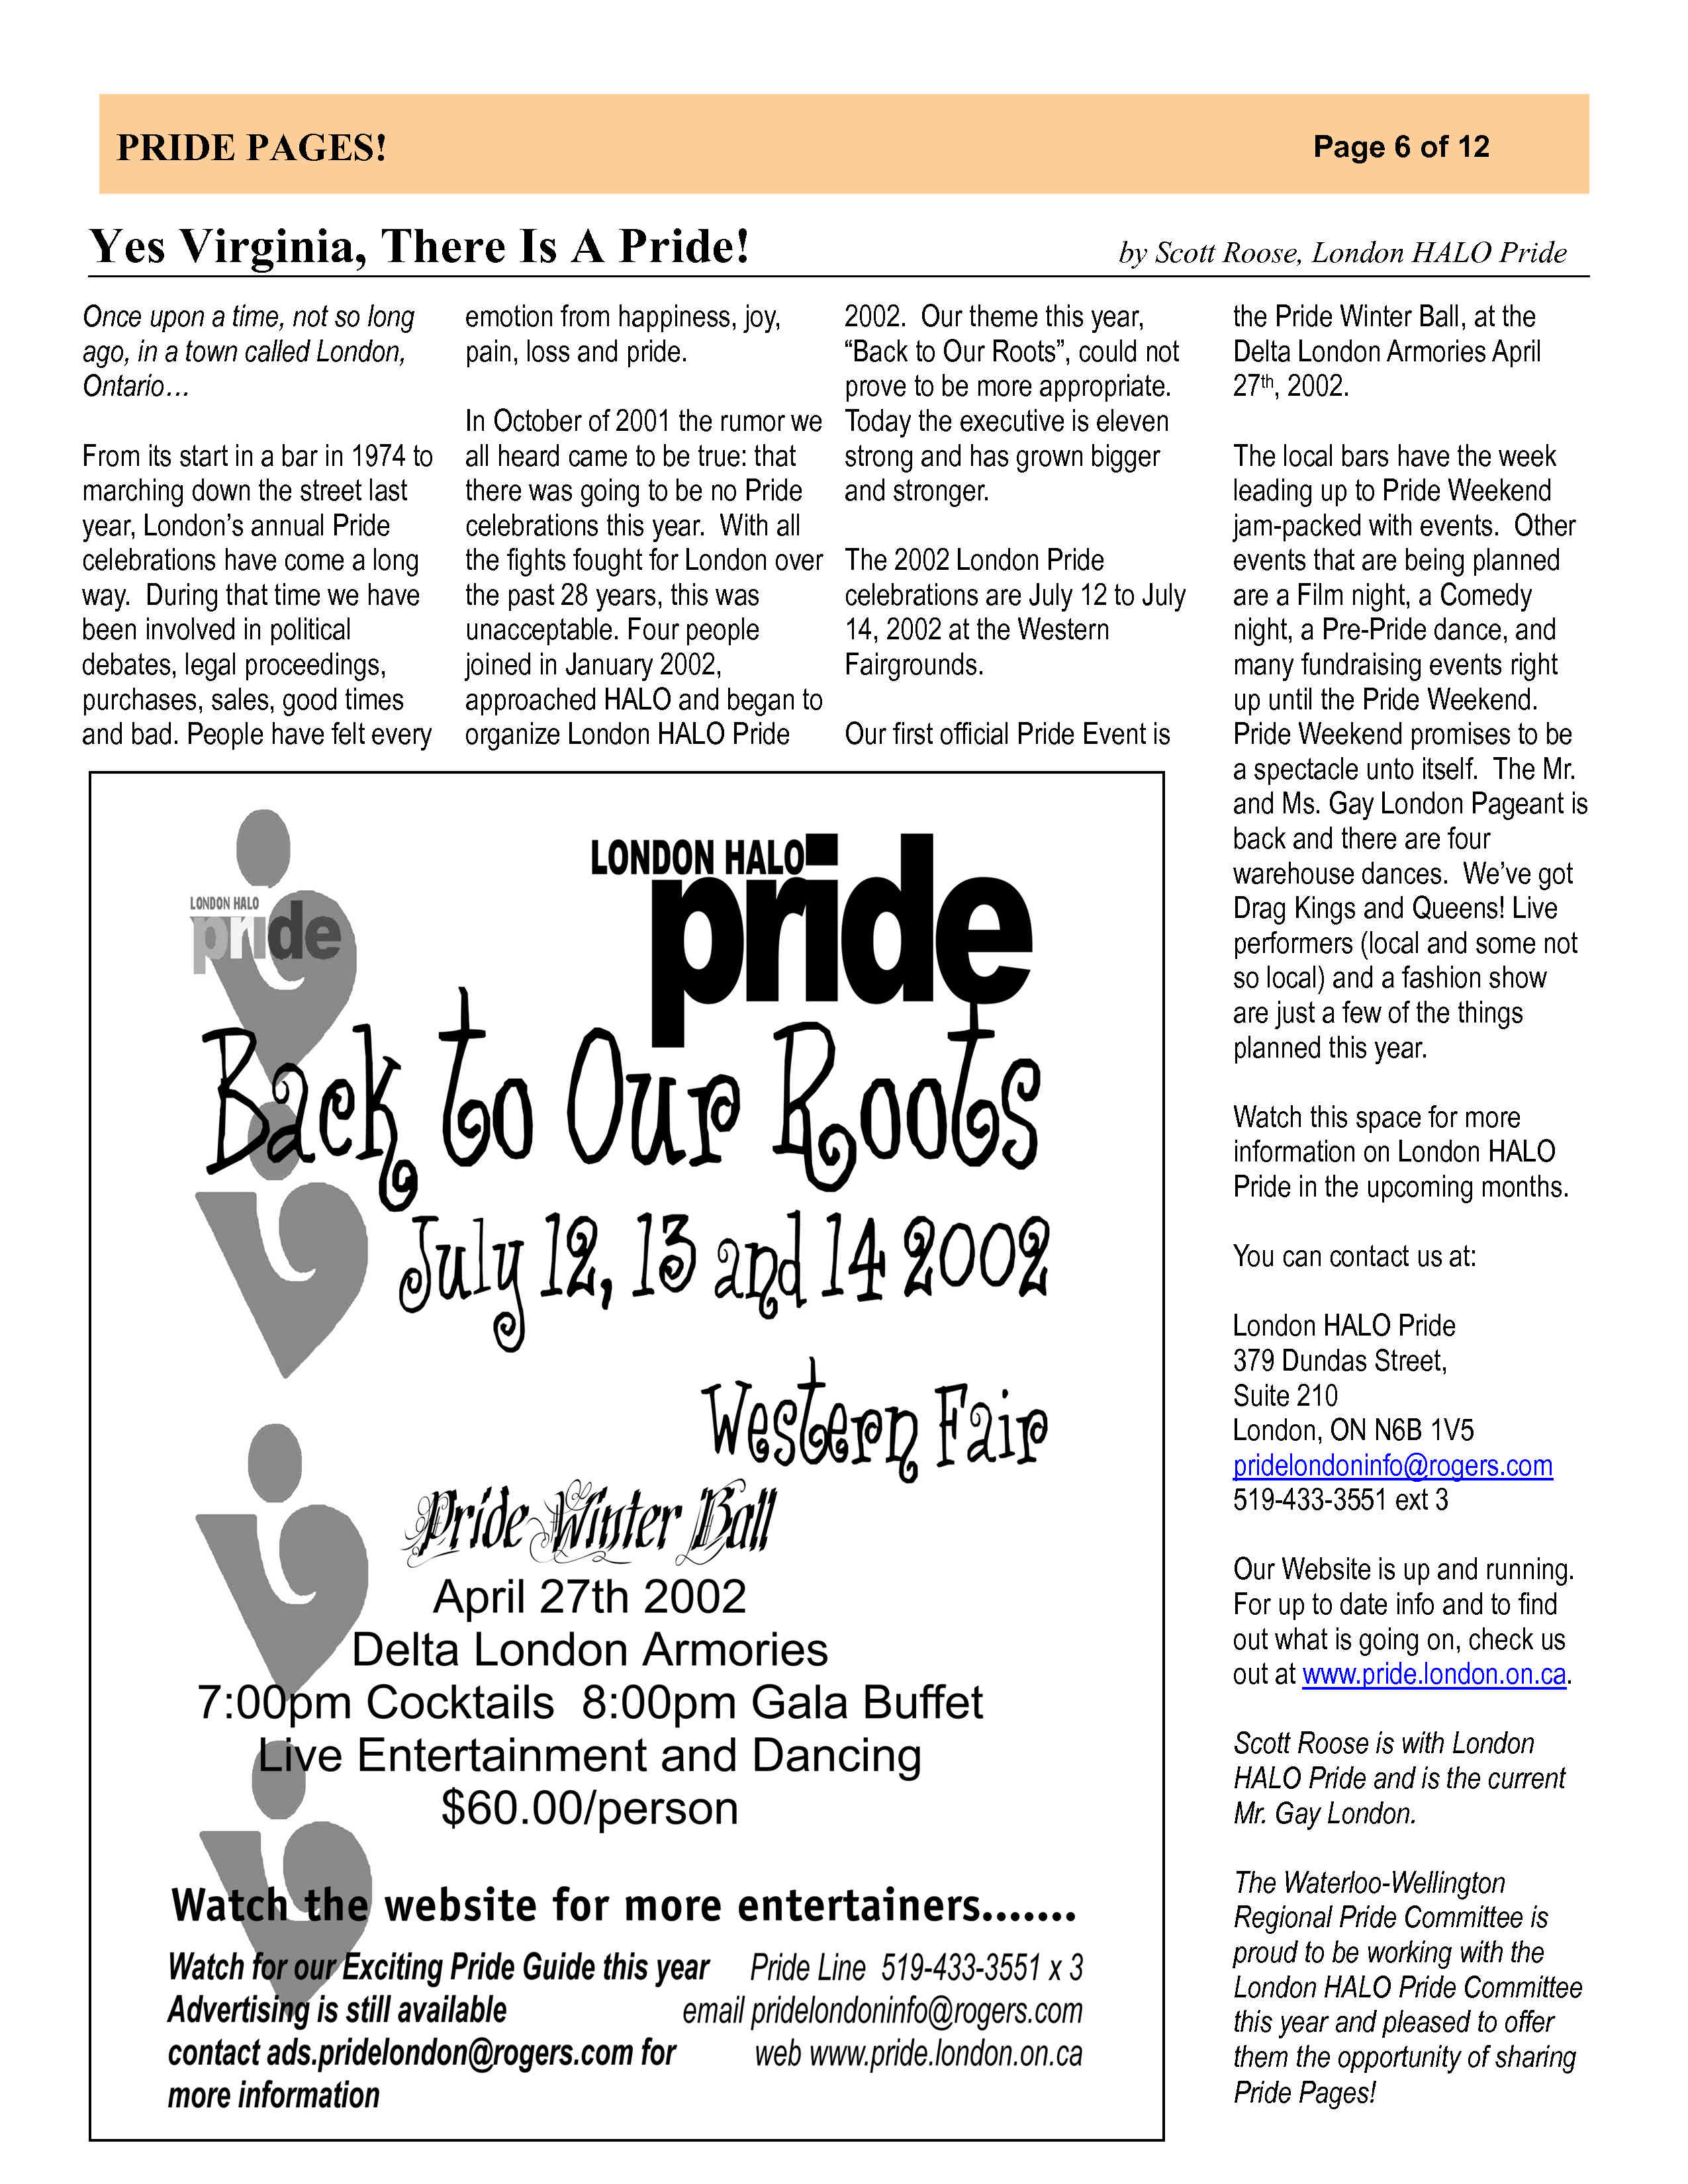 Pride Pages 2002-04 p6